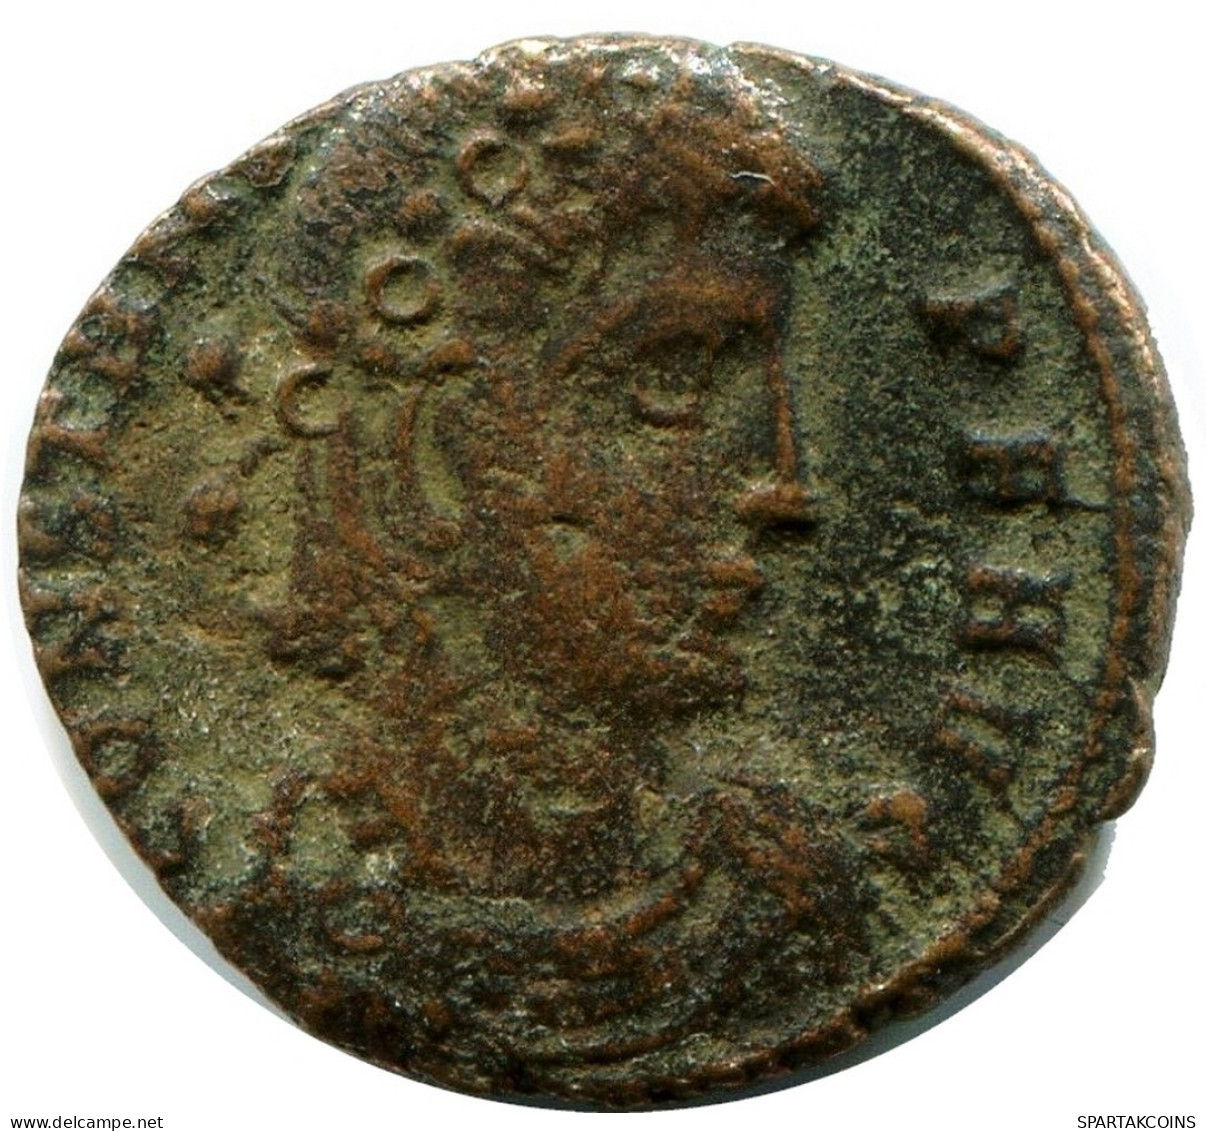 CONSTANS MINTED IN THESSALONICA FROM THE ROYAL ONTARIO MUSEUM #ANC11879.14.F.A - L'Empire Chrétien (307 à 363)